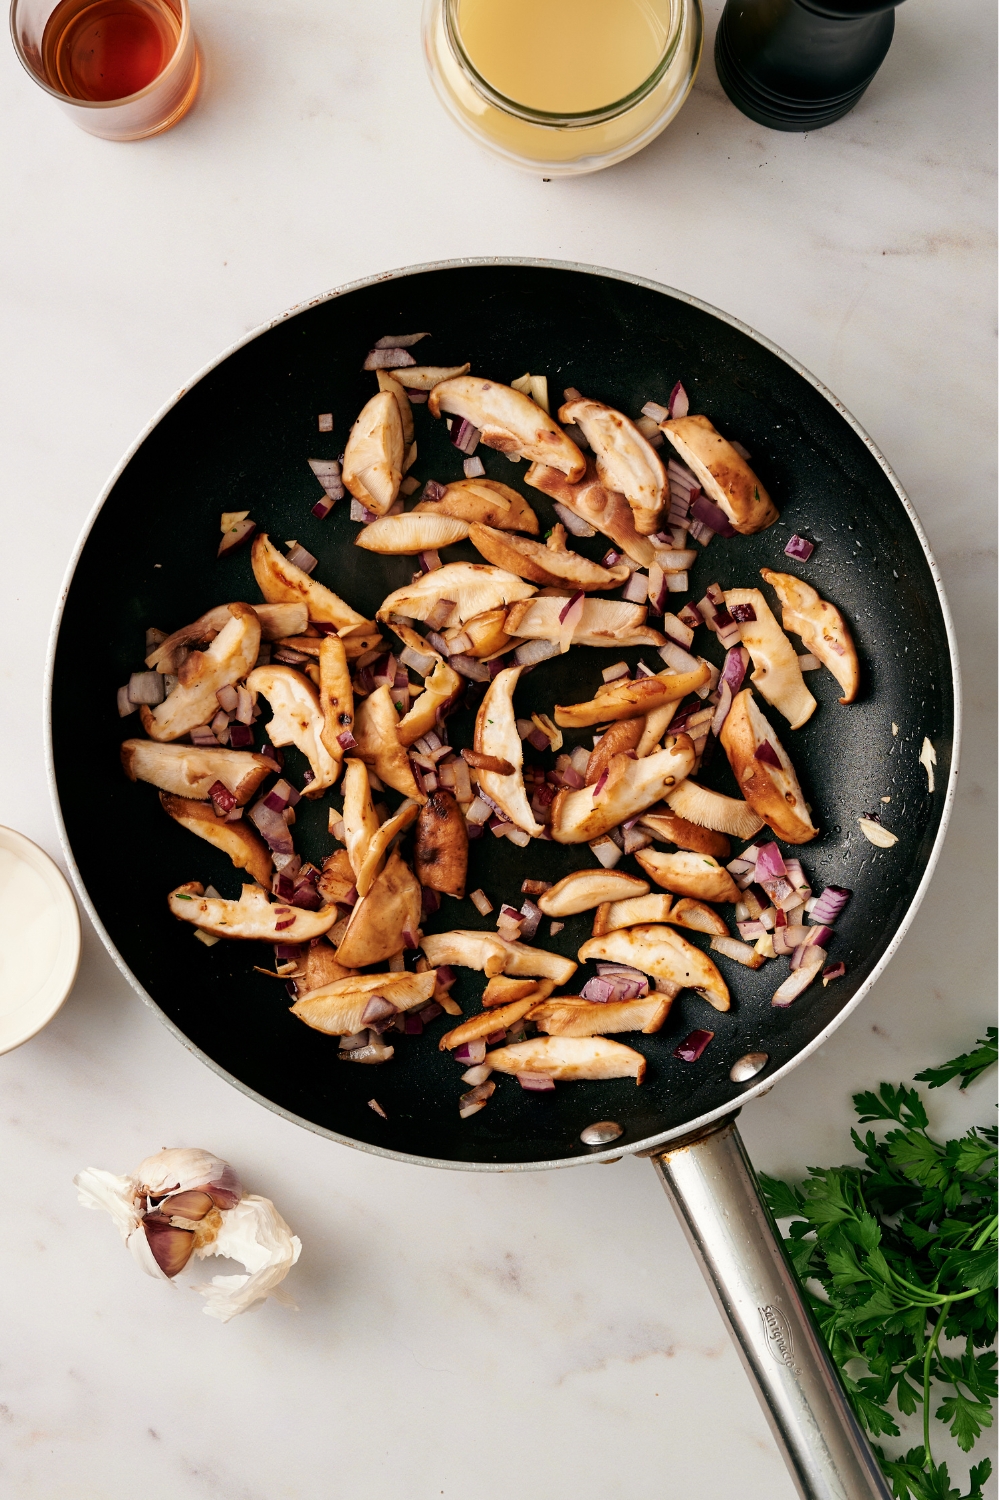 A skillet with cooked mushrooms and onions.